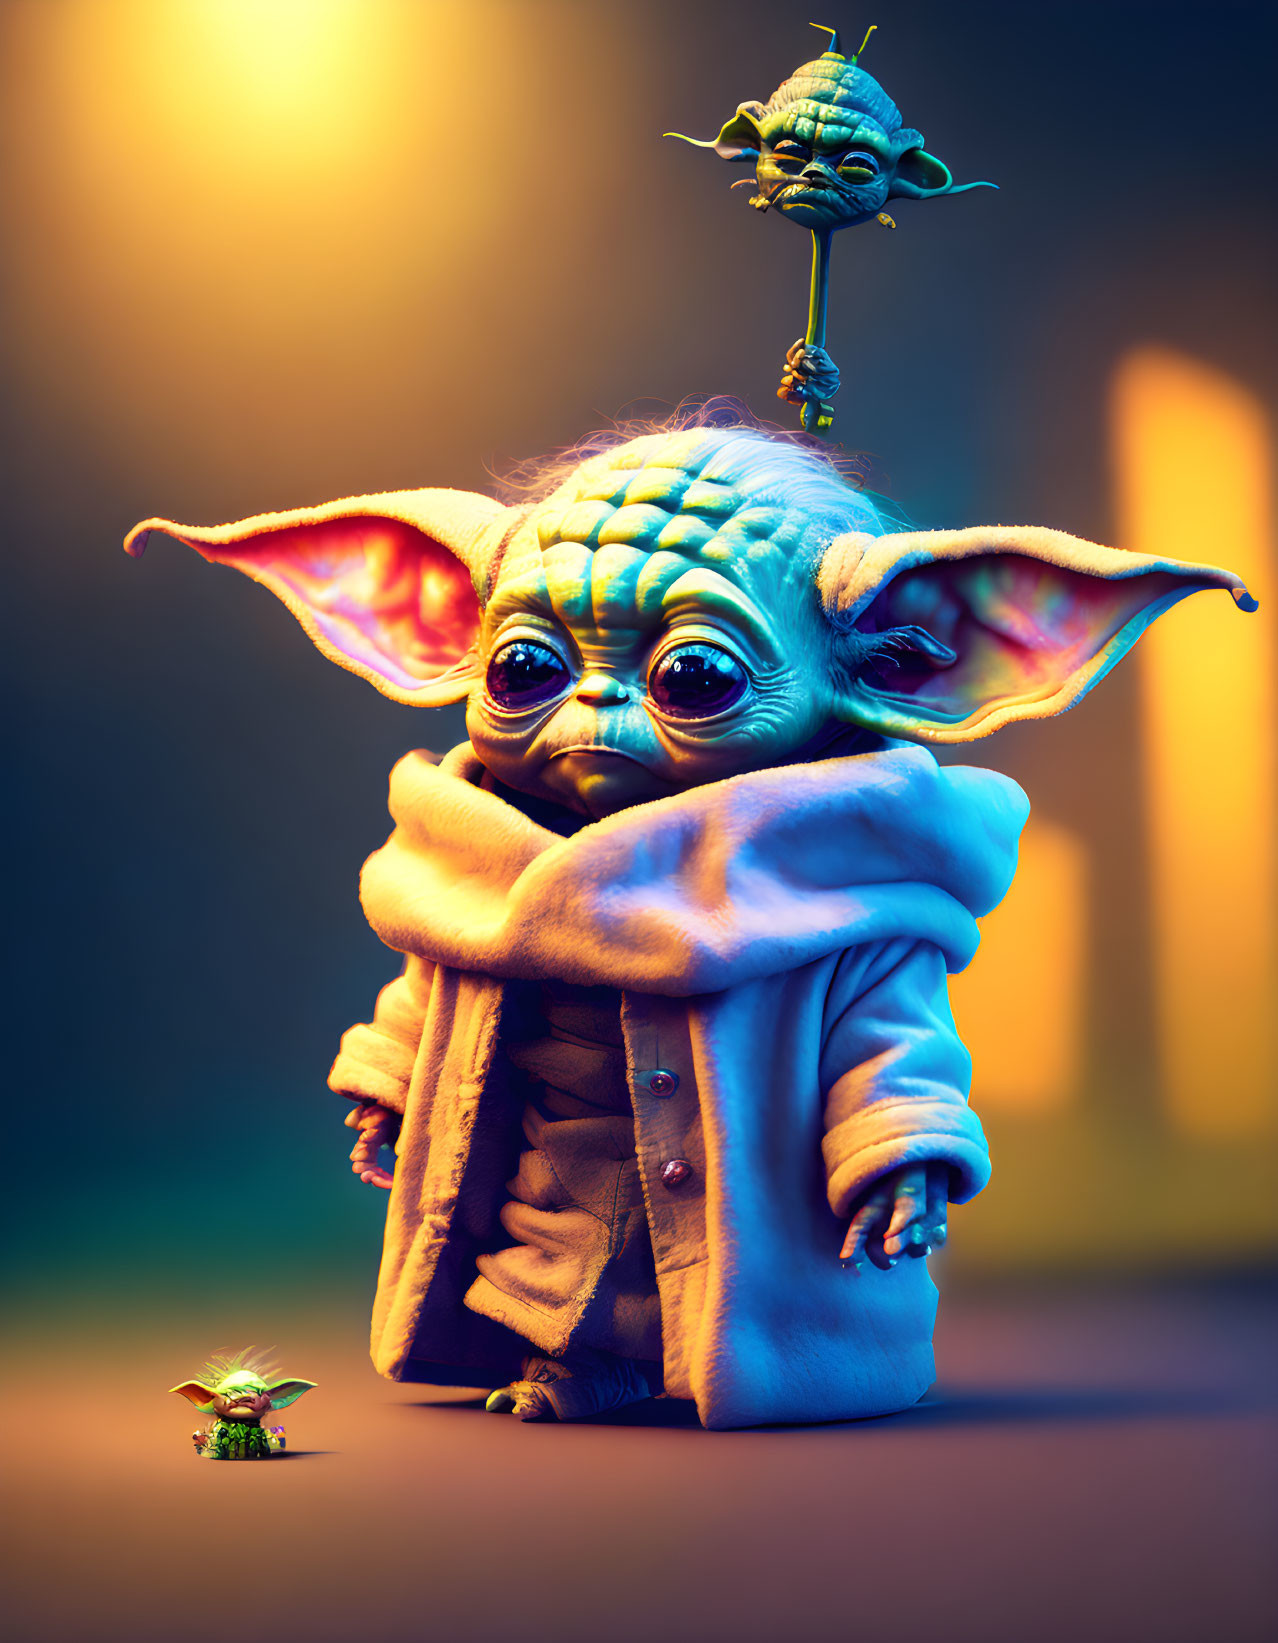 Three Yoda characters in varied sizes against a colorful backdrop with dramatic lighting